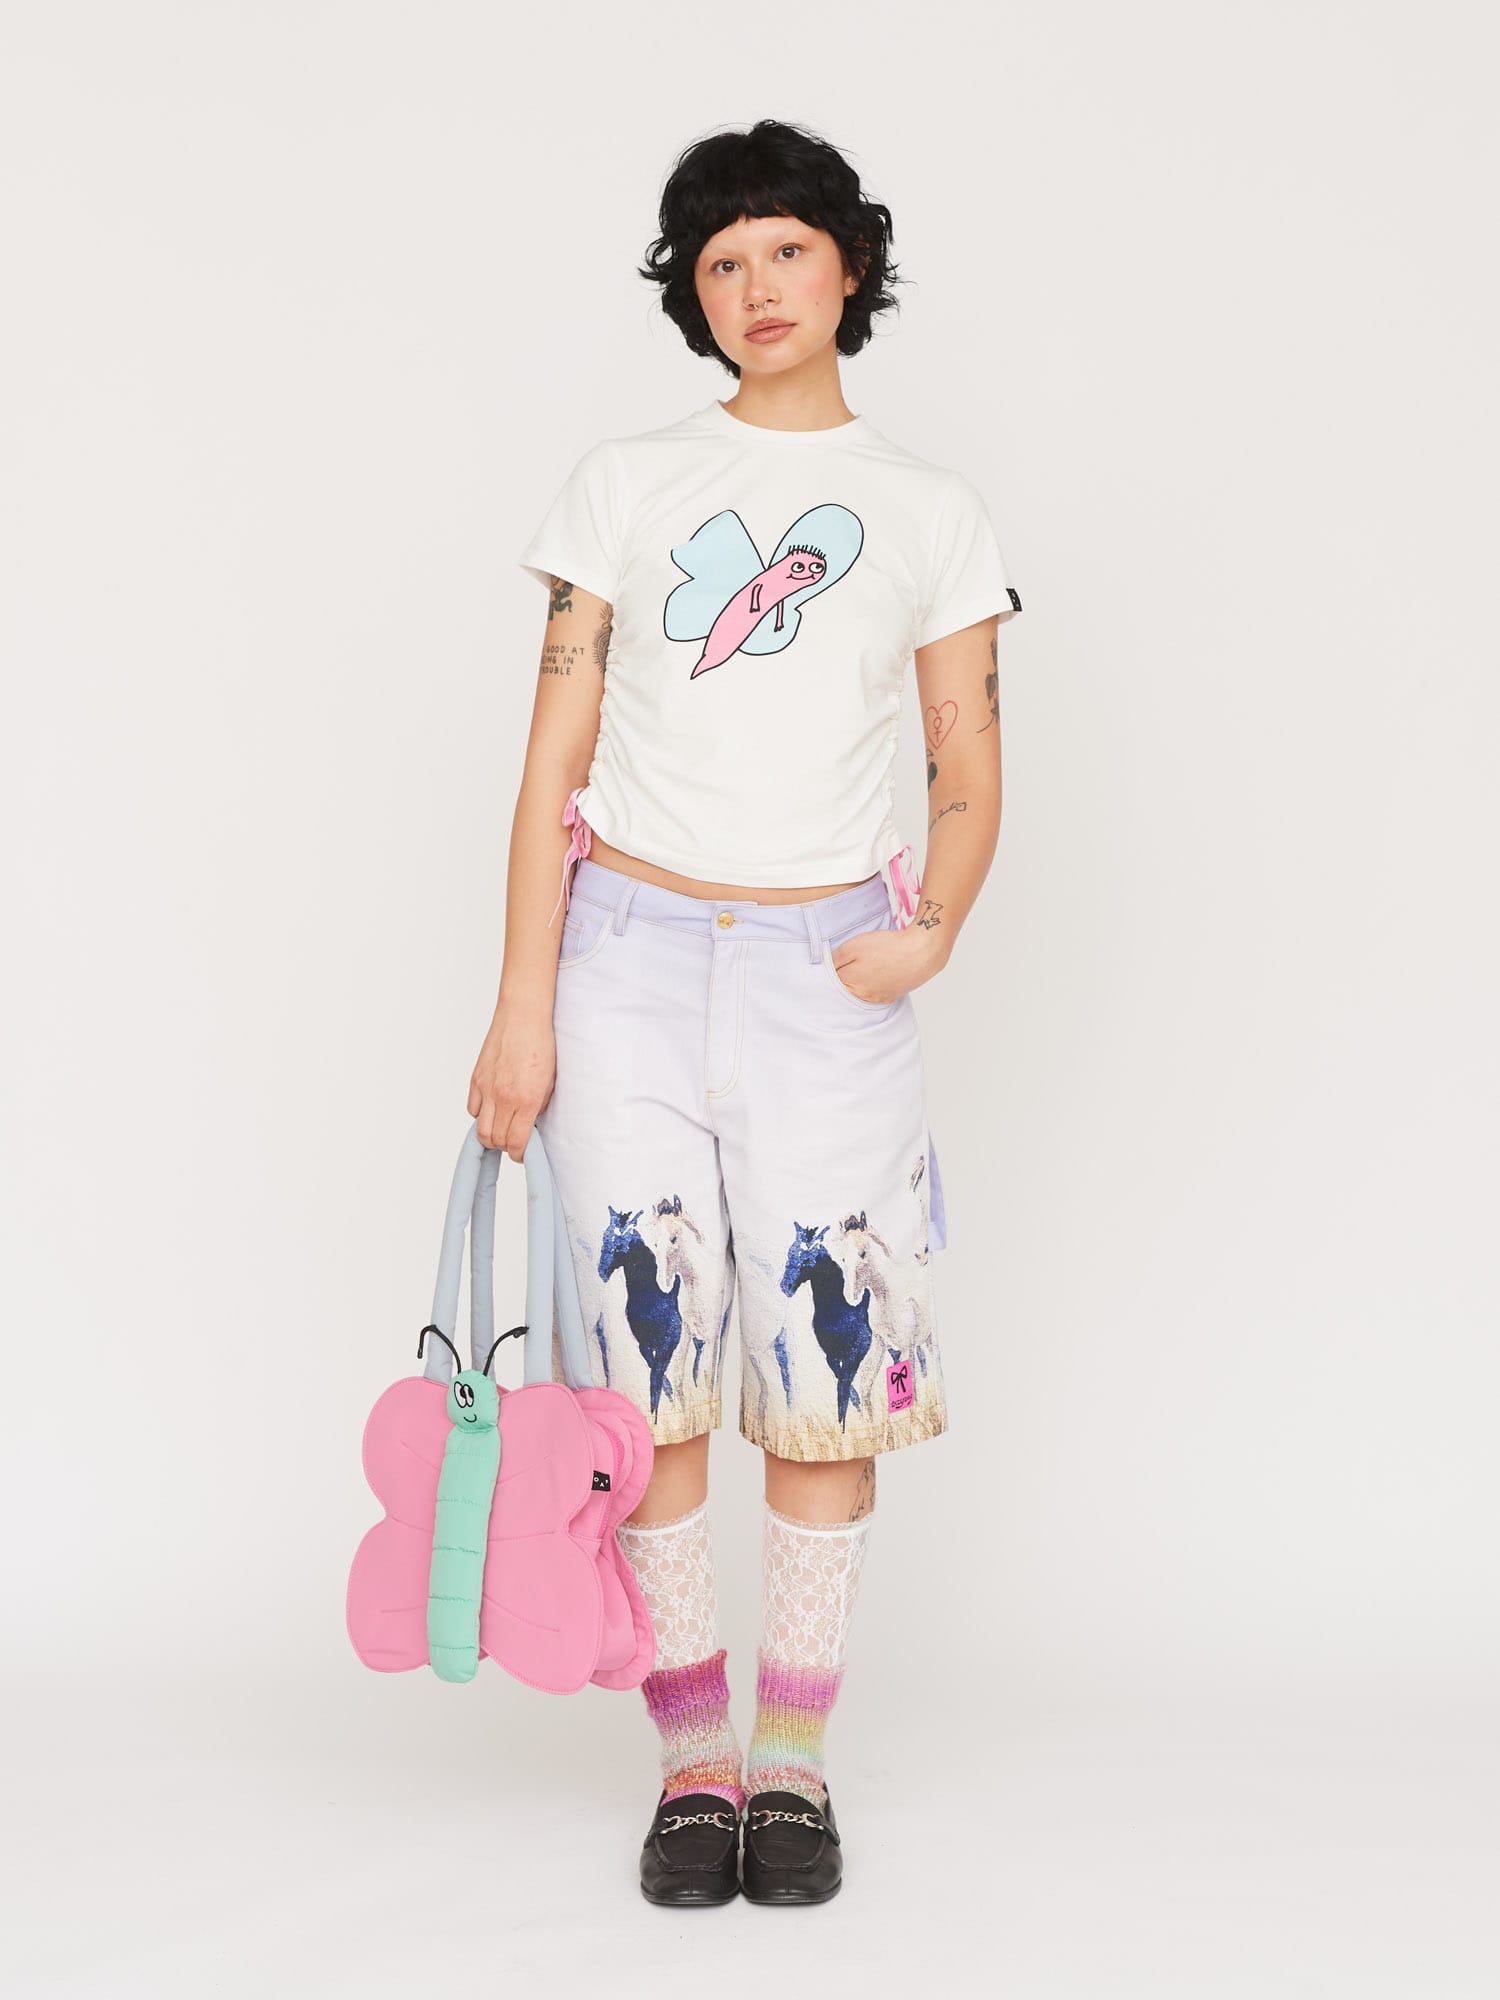 Women's Tops & T-Shirts | Ladies Tops | Graphic Tees | Lazy Oaf